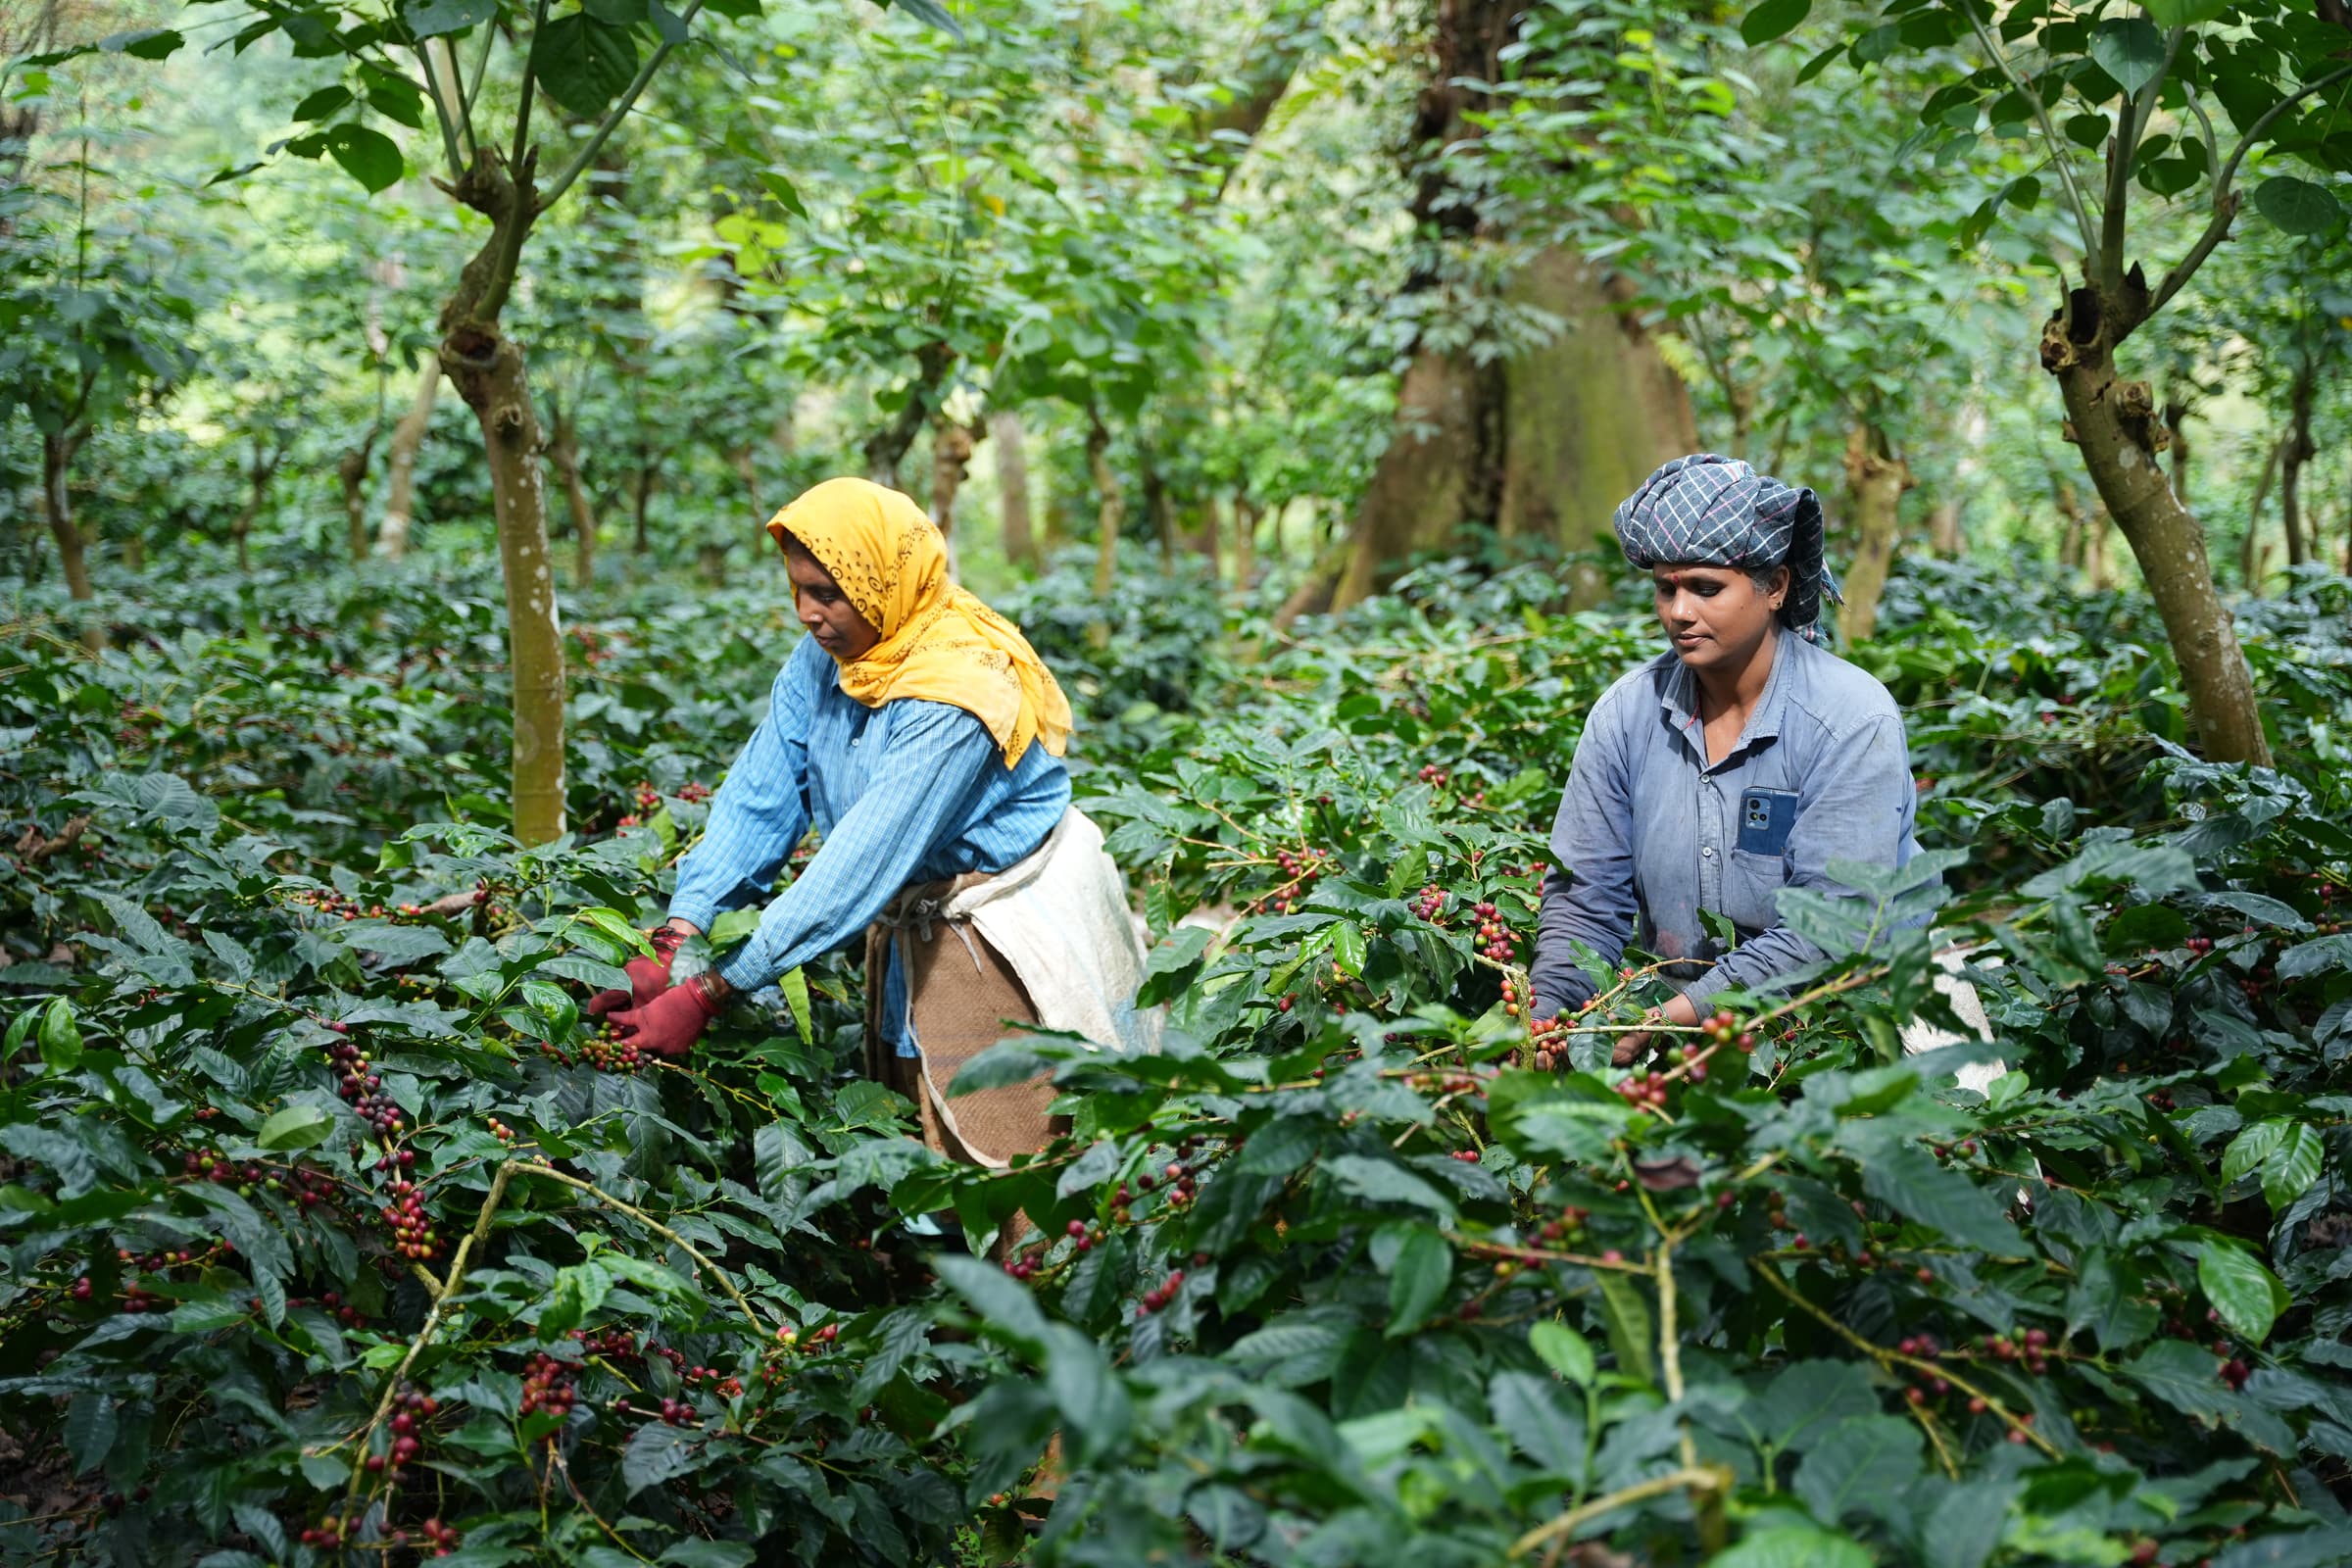 Harvesters pick coffee from CCRI's research plots in Balehonnur, Karnakata India.